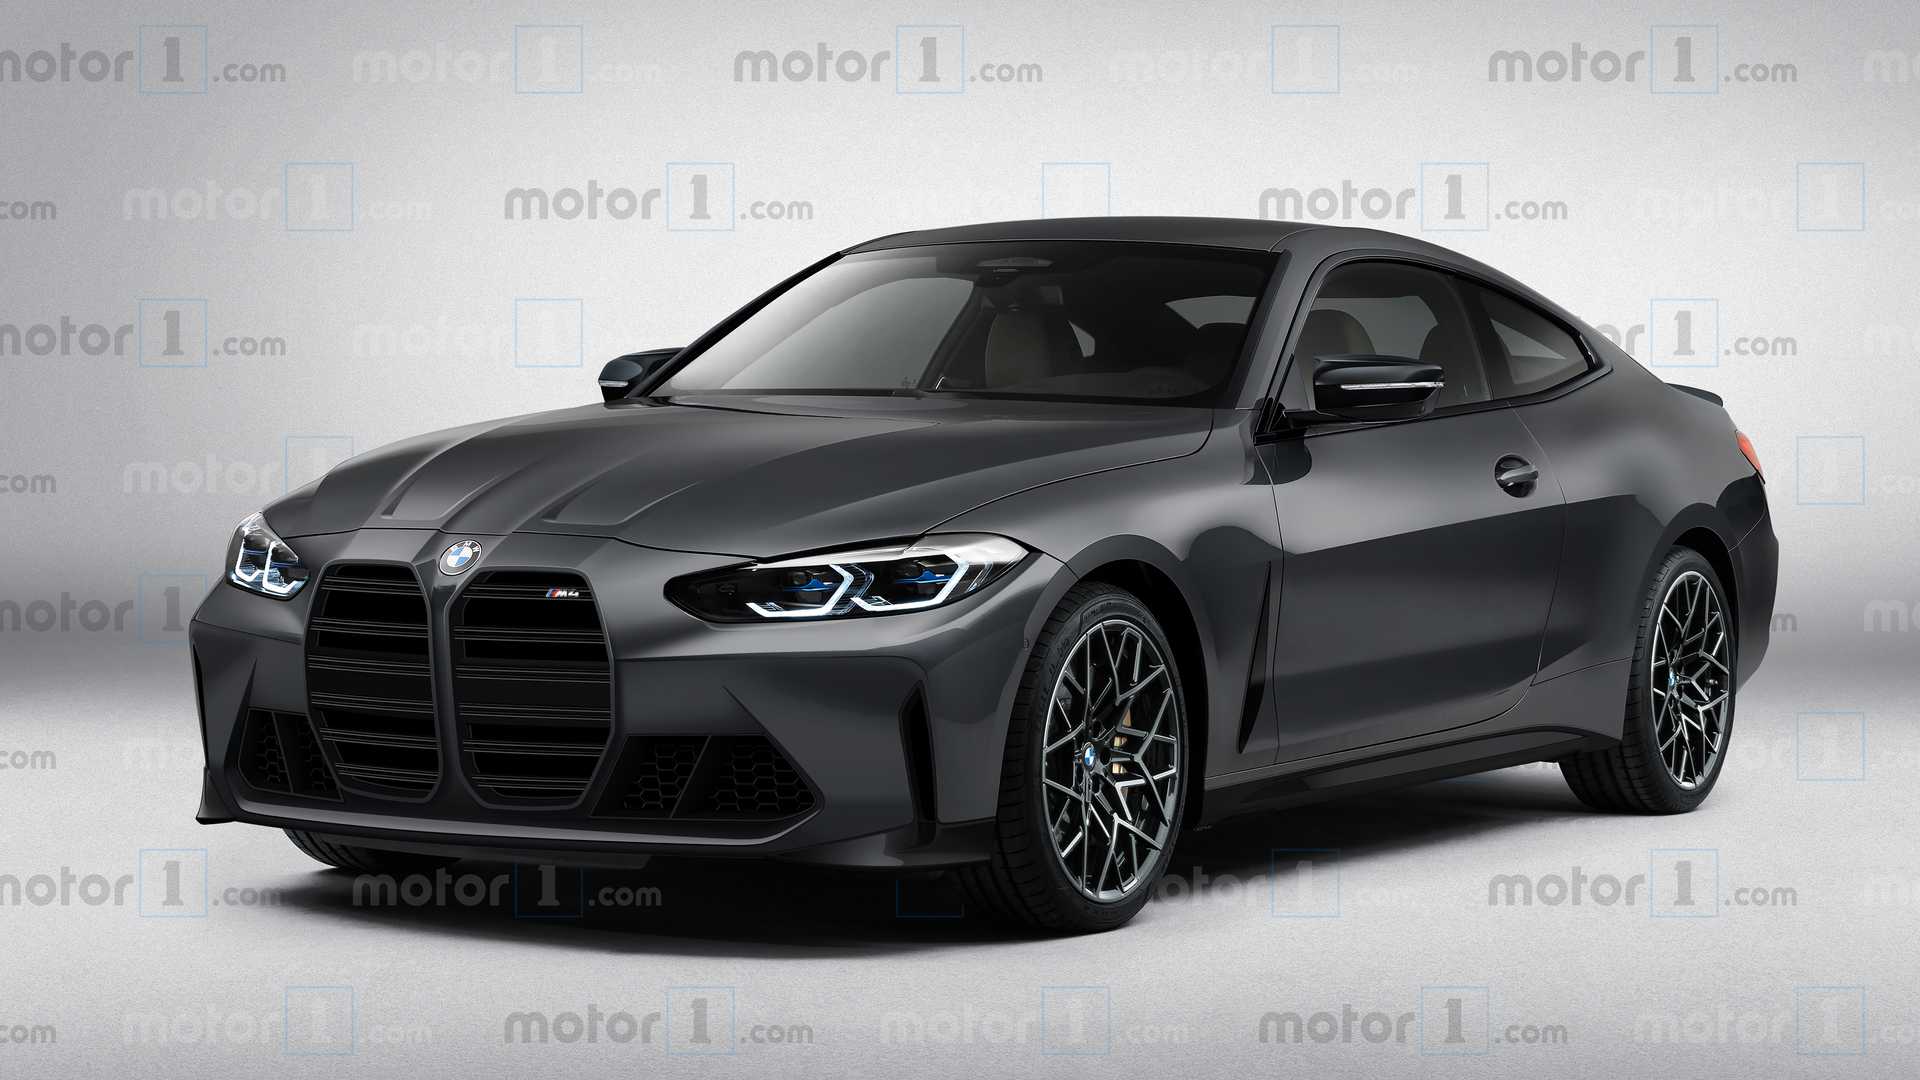 2021-bmw-m4-coupe-rendering-by-motor1.com.jpg